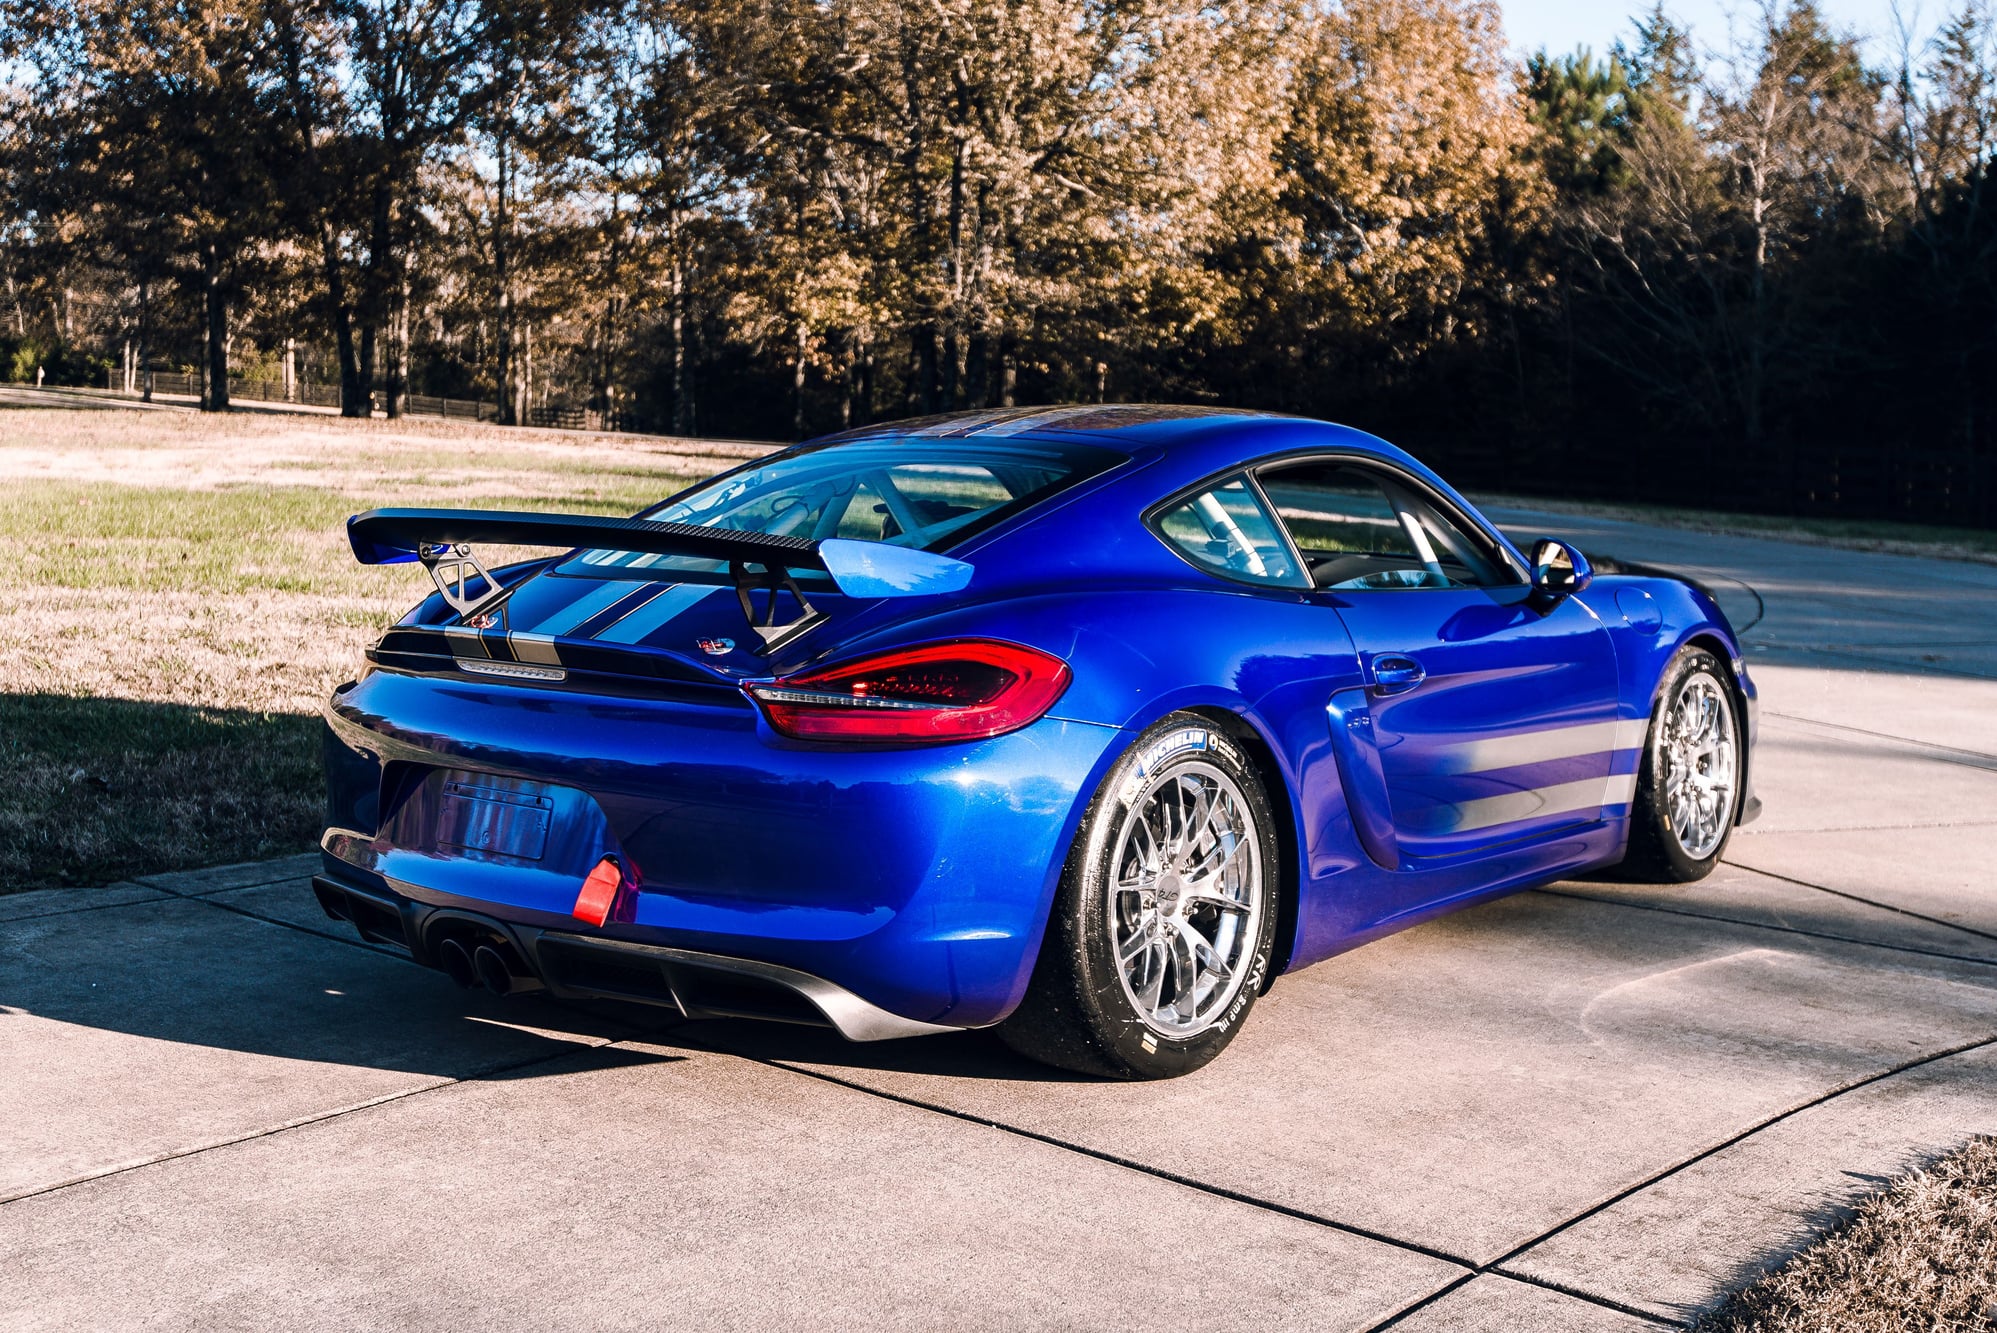 2016 Porsche Cayman GT4 - 2016 Cayman GT4 Clubsport - Used - VIN WP0AB2A88CS793247 - 1,146 Miles - 6 cyl - 2WD - Automatic - Coupe - Blue - Franklin, TN 37064, United States